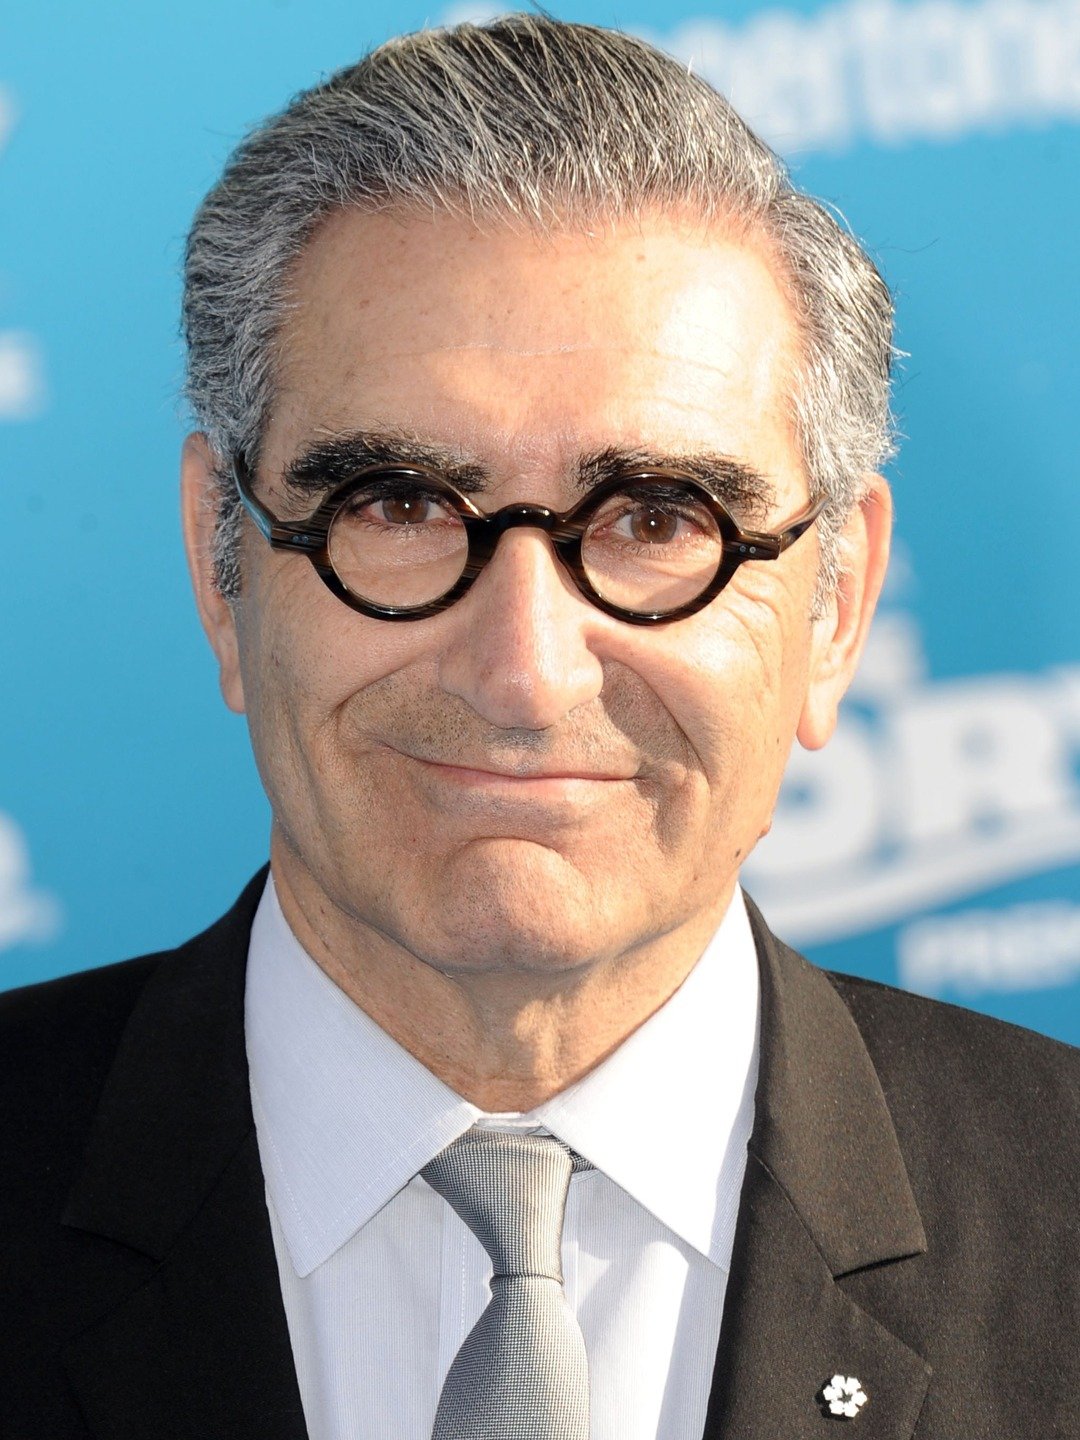 How tall is Eugene Levy?